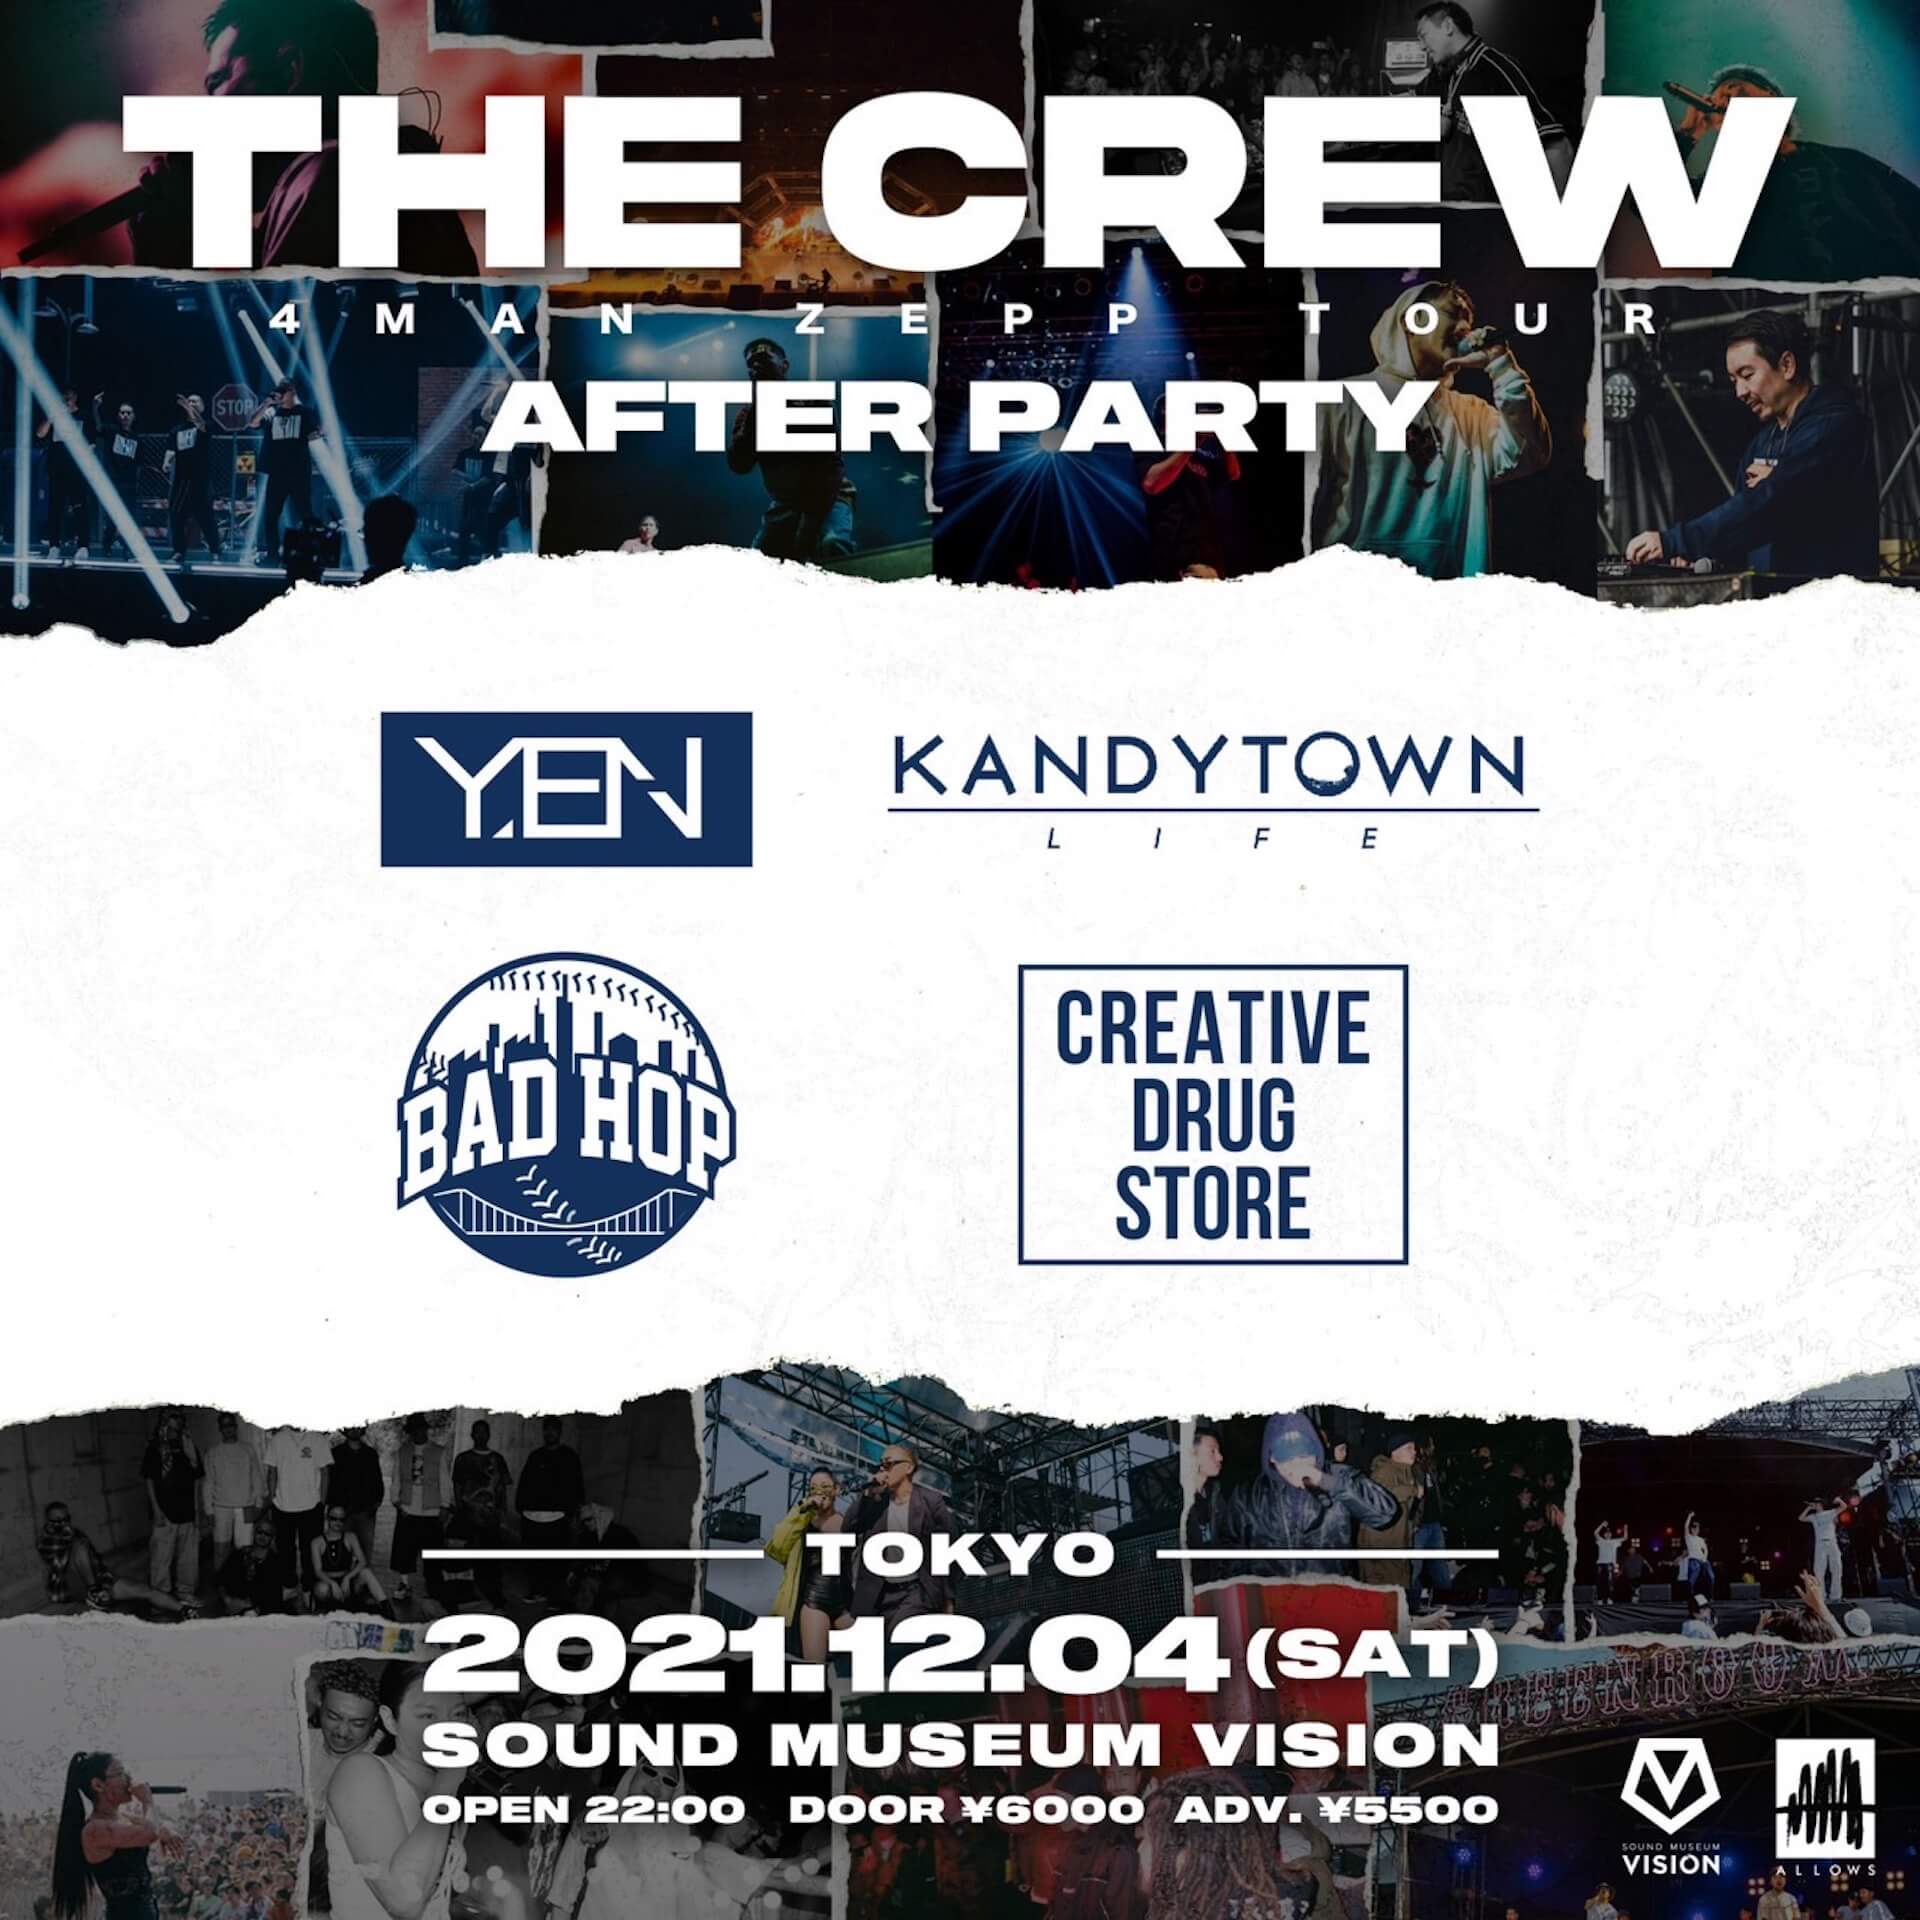 BAD HOP、CreativeDrugStore、KANDYTOWN、YENTOWNの4大クルー集結！＜THE CREW＞のアフターパーティーがVISIONにて開催 music1129_thecrew-afterparty_1